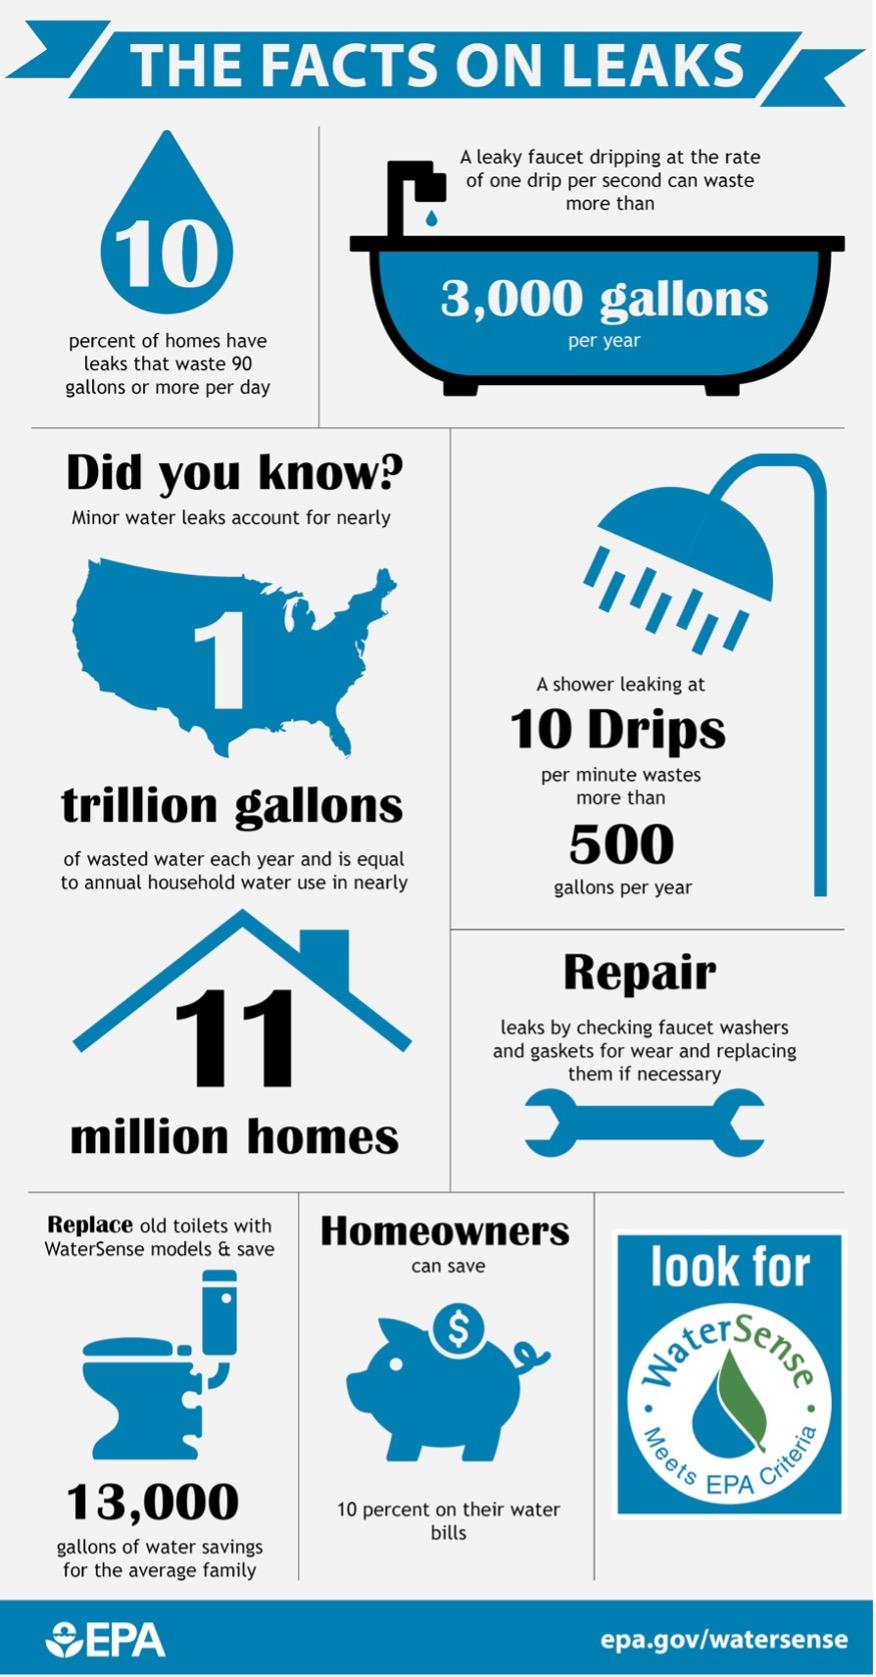 THE FACTS ON LEAKS, 10 percent of homes have leaks that waste 90 gallons or more per day. Did you know? Minor water leaks account for nearly trillion gallons of wasted water each year and is equal to annual household water use in nearlv 11 million homes. Replace old toilets with WaterSense models & save Homeowners can save S look for 13.000 gallons of water savings. Repair leaks by checking faucet washers and gaskets for wear and replacing them if necessary